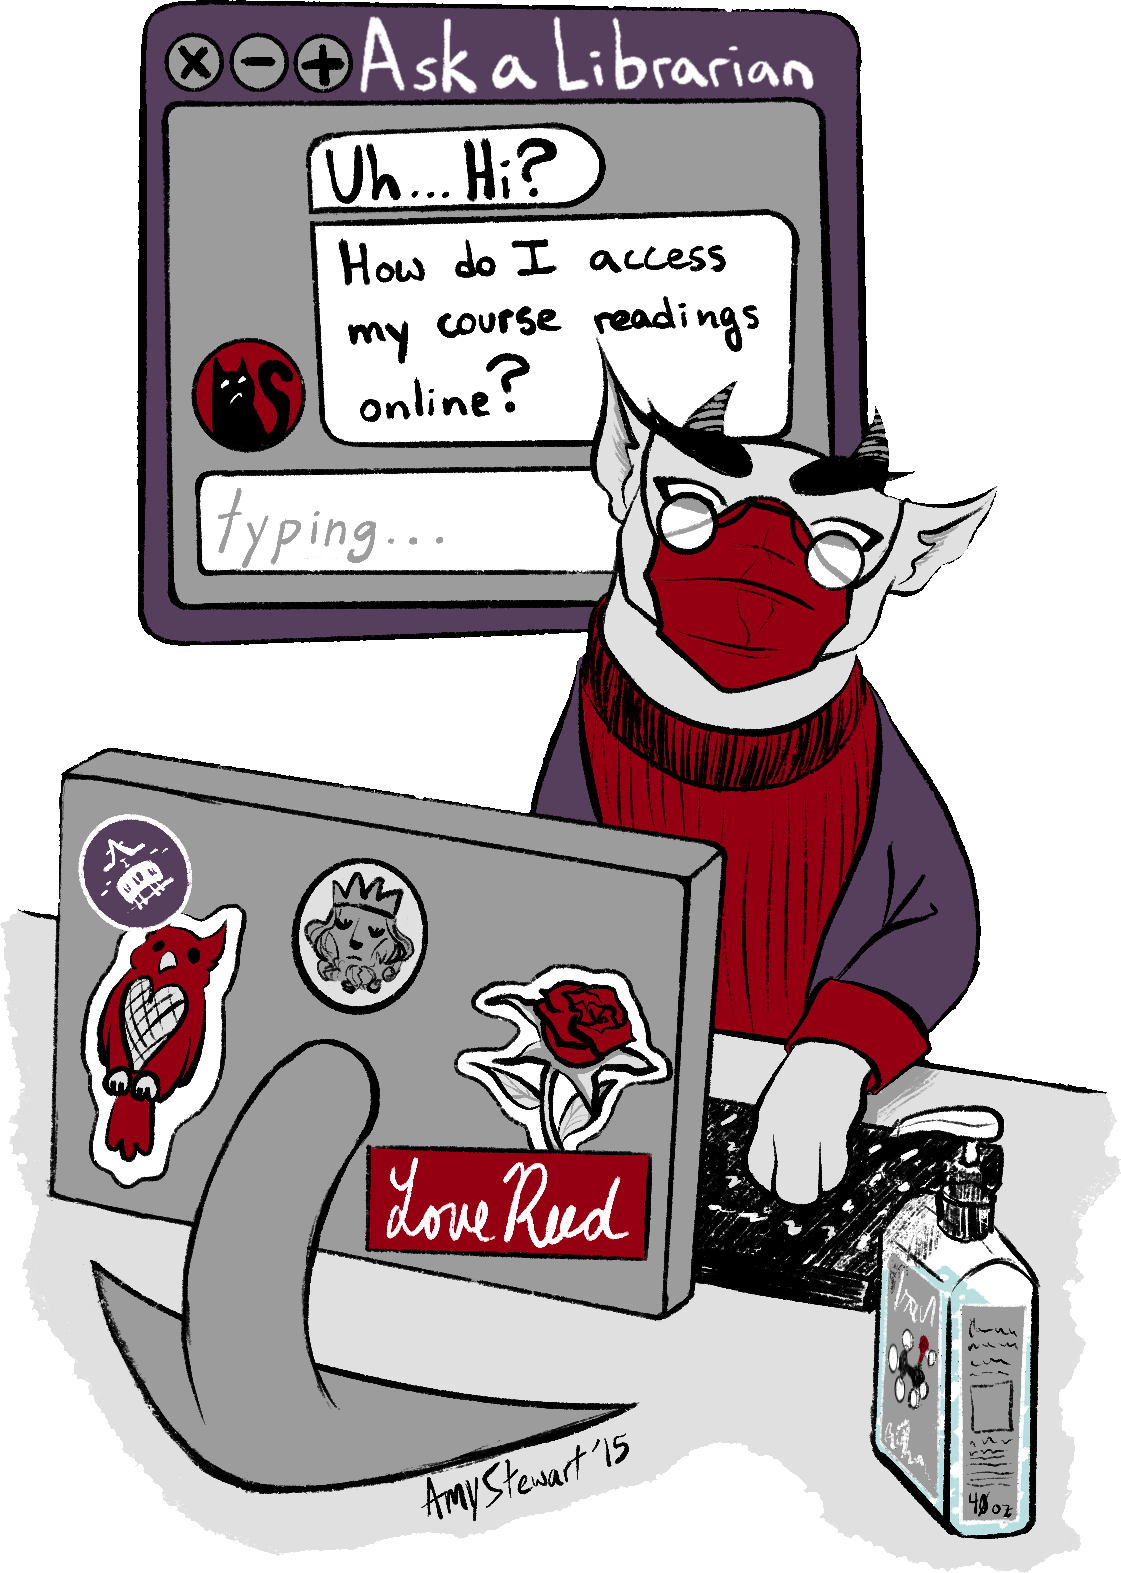 Mugsy in a mask at the computer. Artwork by Amy Stewart '15